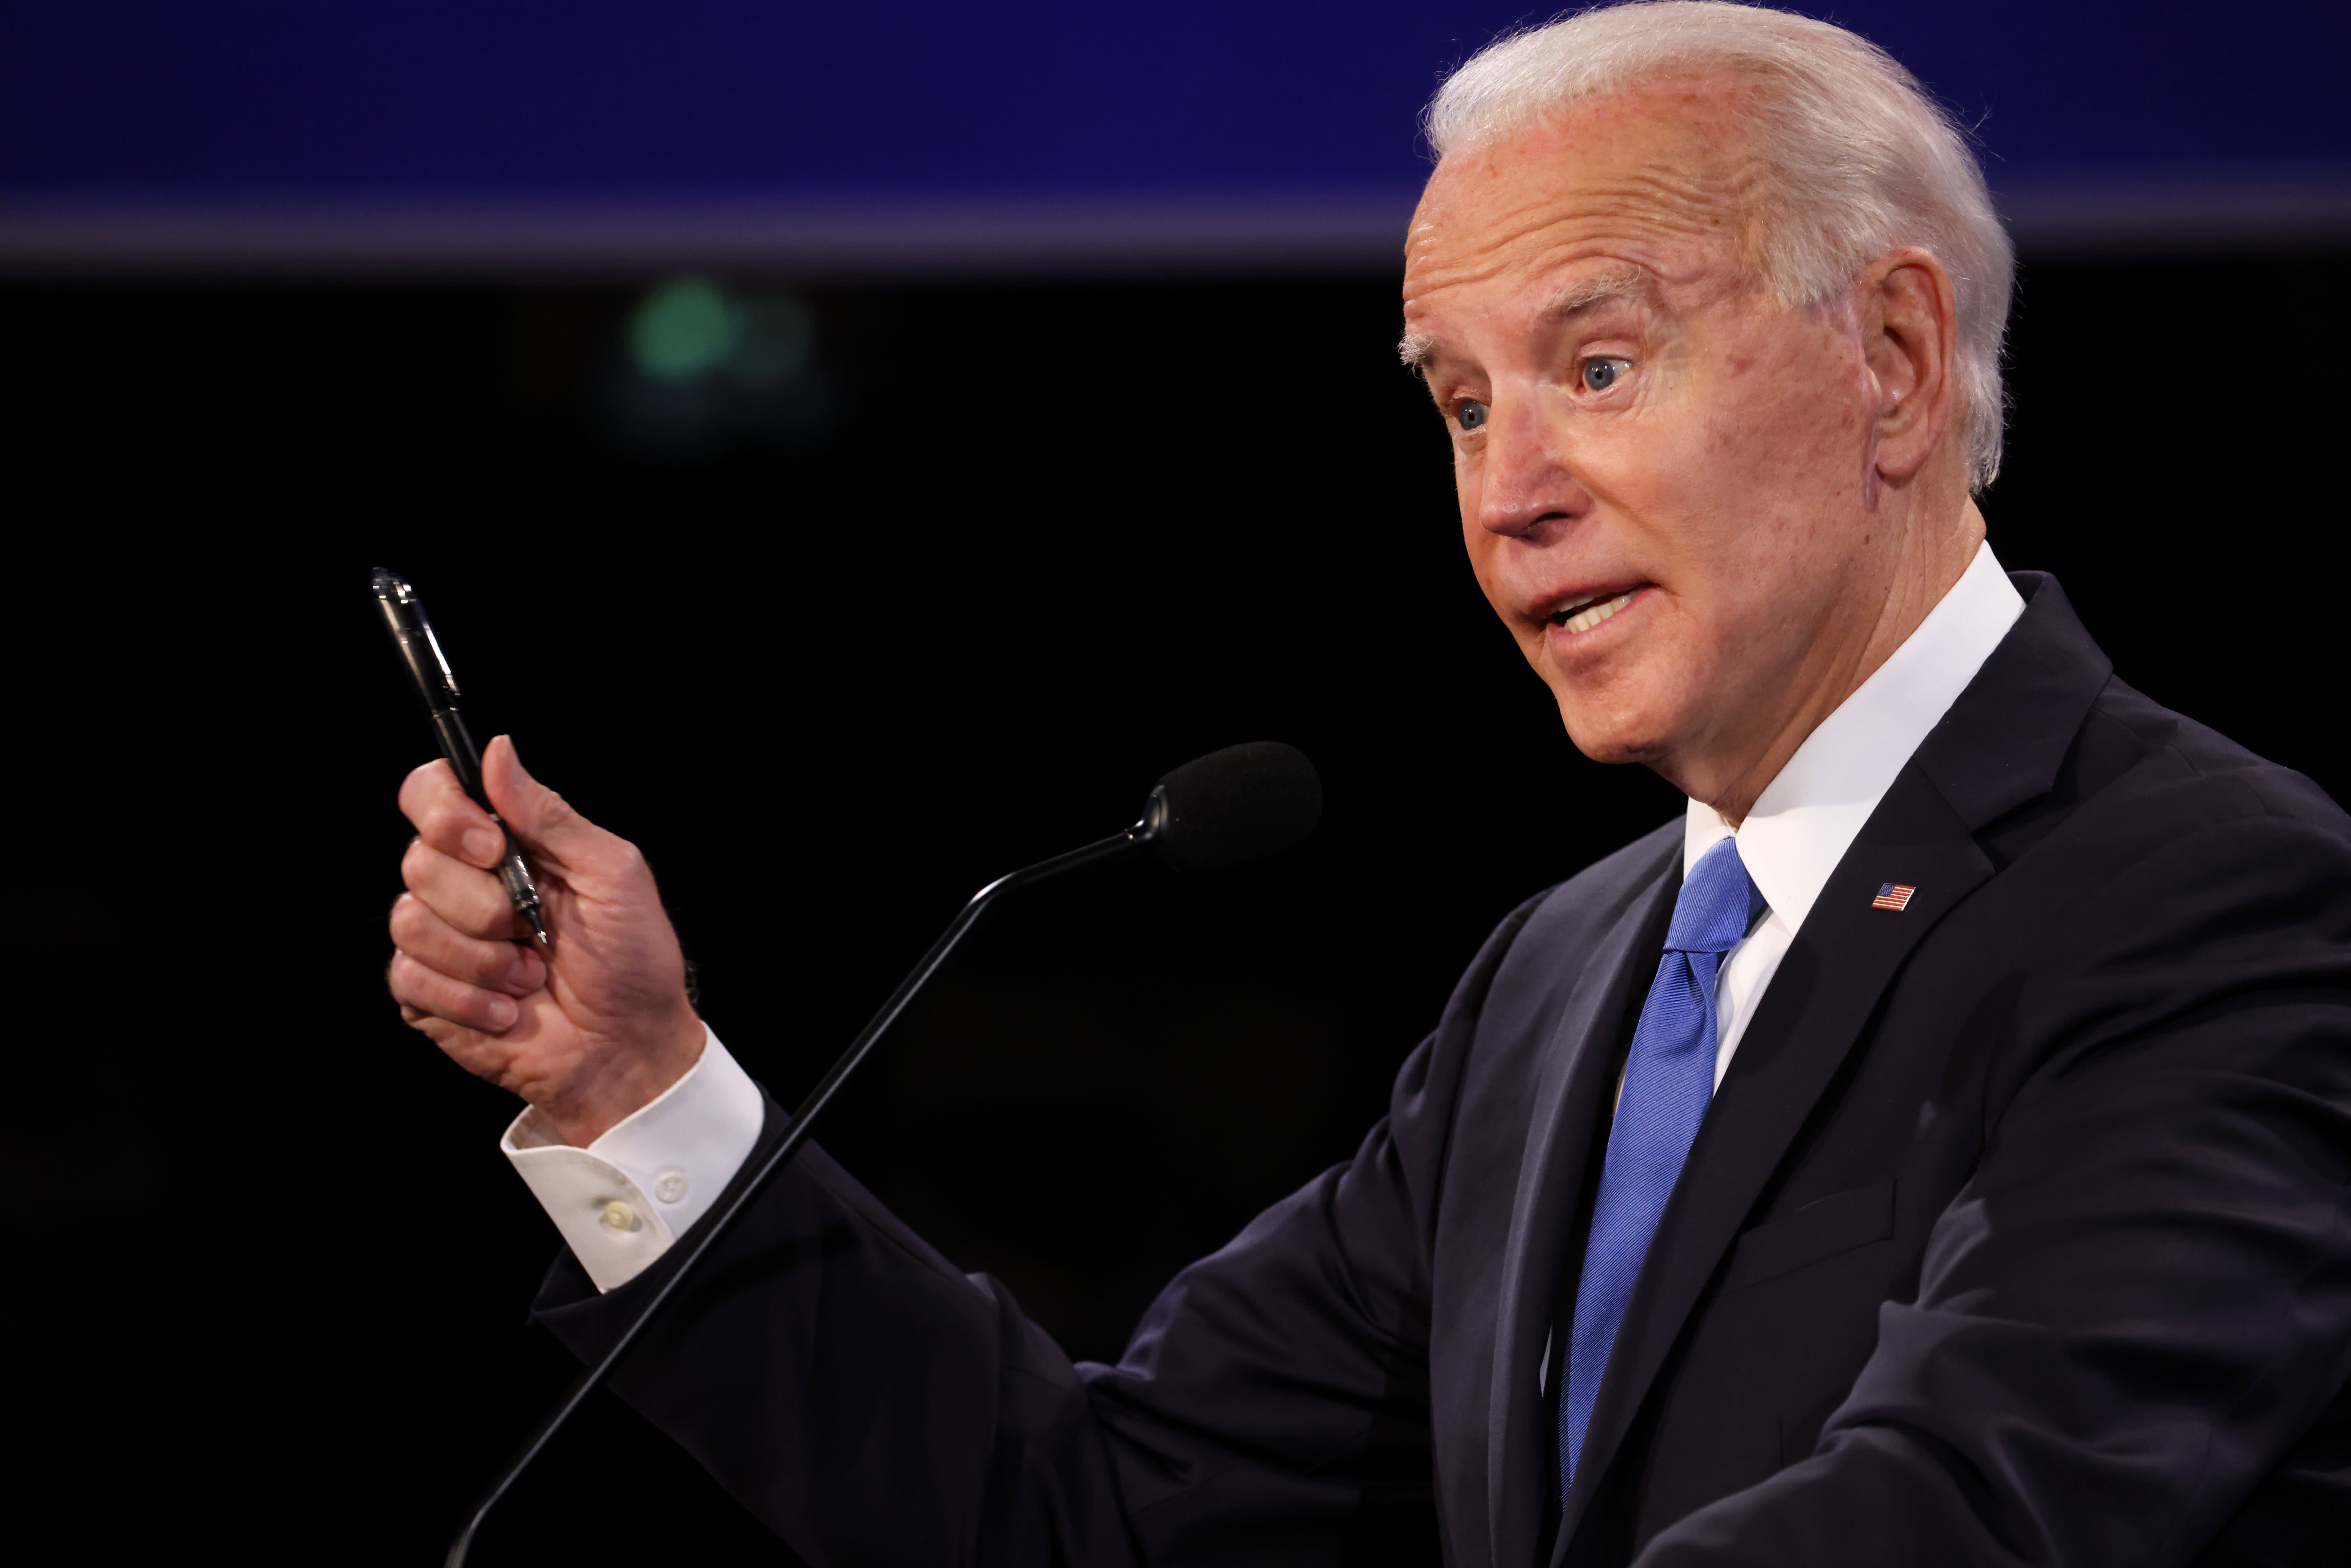 Joe Biden calls climate change the ‘number one issue facing humanity’ - CNBC